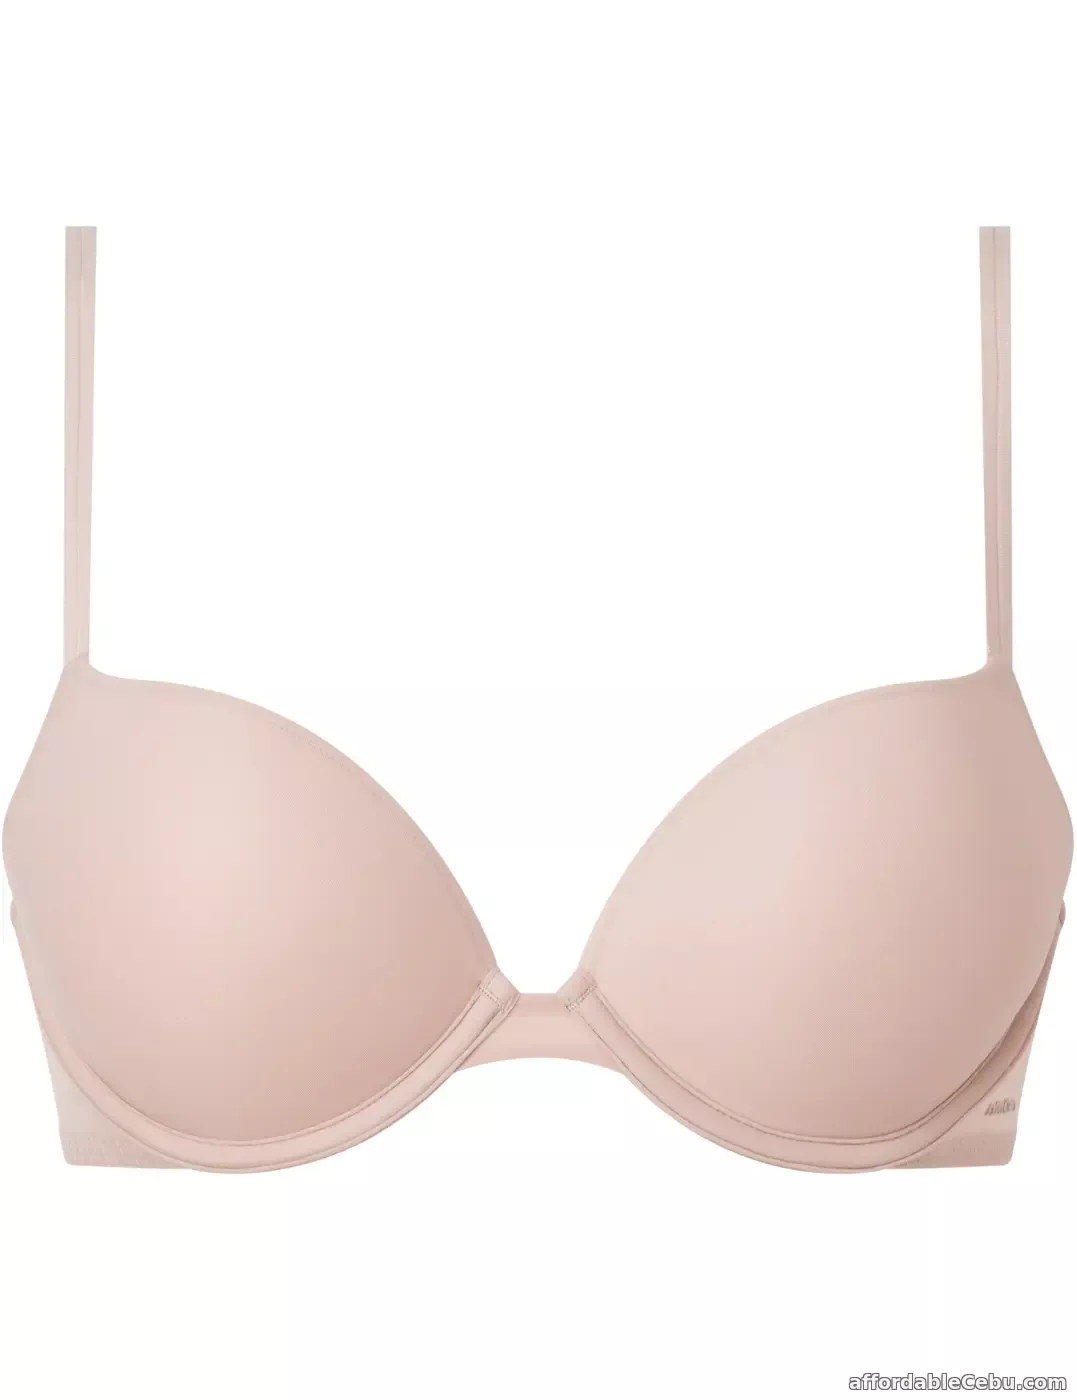 1st picture of Calvin Klein Sheer Marquisette Plunge Bra 000QF6345E Underwired Push-Up Bras For Sale in Cebu, Philippines